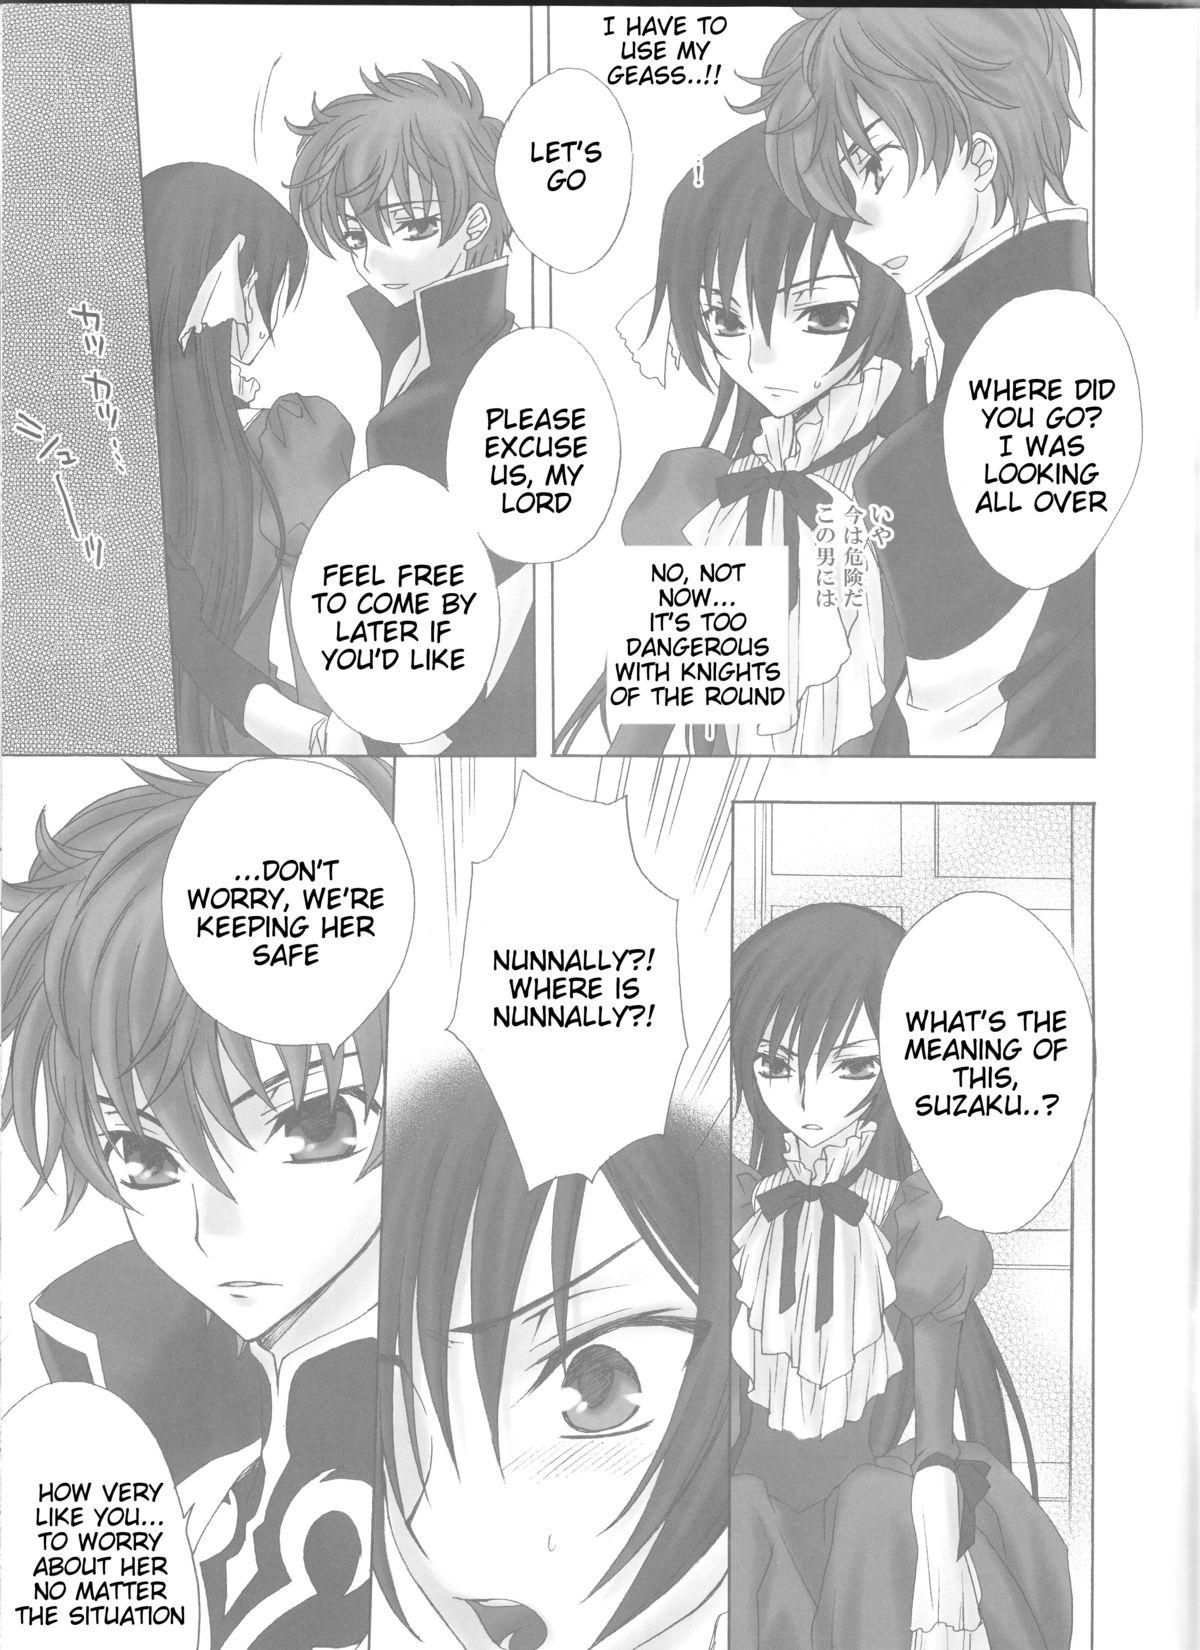 Virtual Dolce Rose - Code geass Lover - Page 5